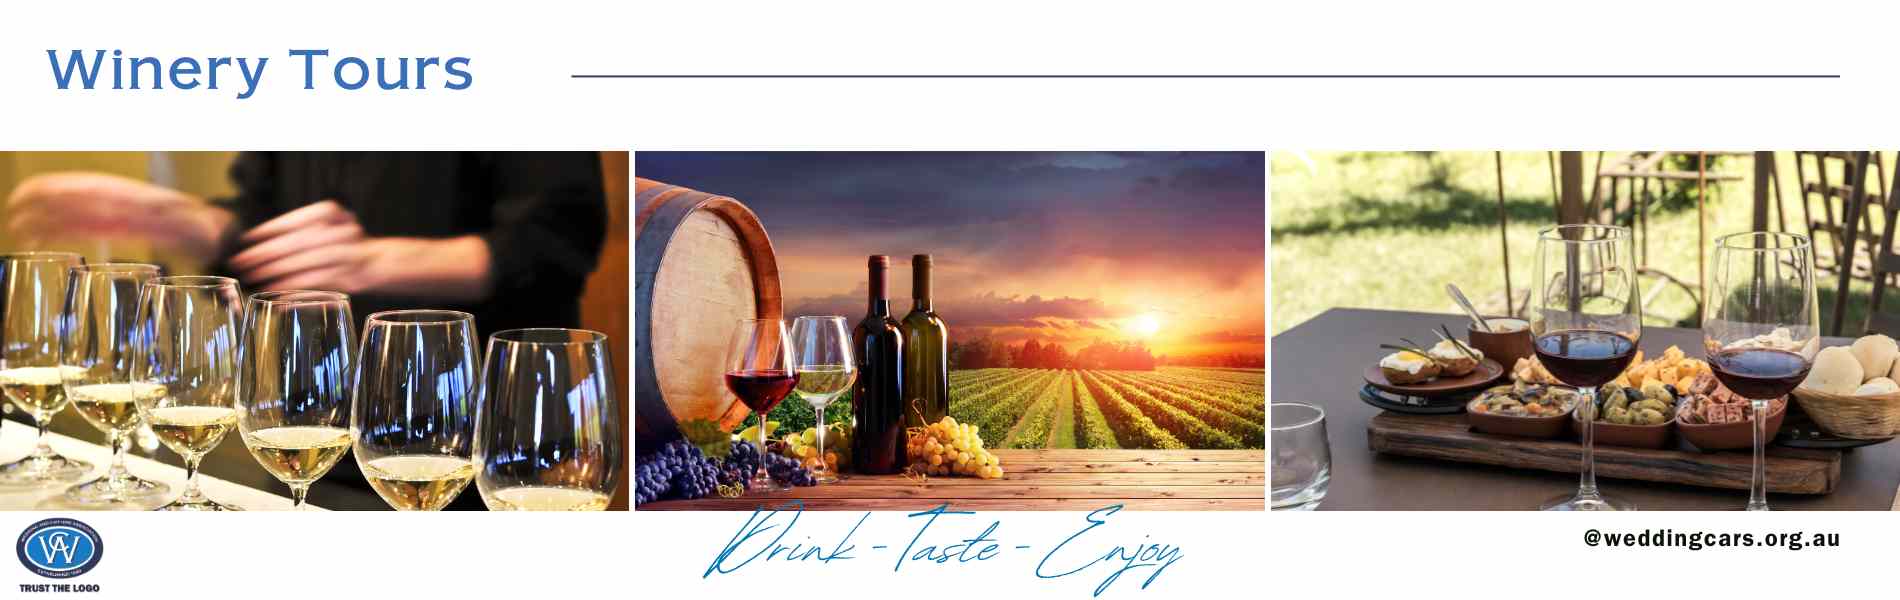 Victorian Chauffeured Winery Tours